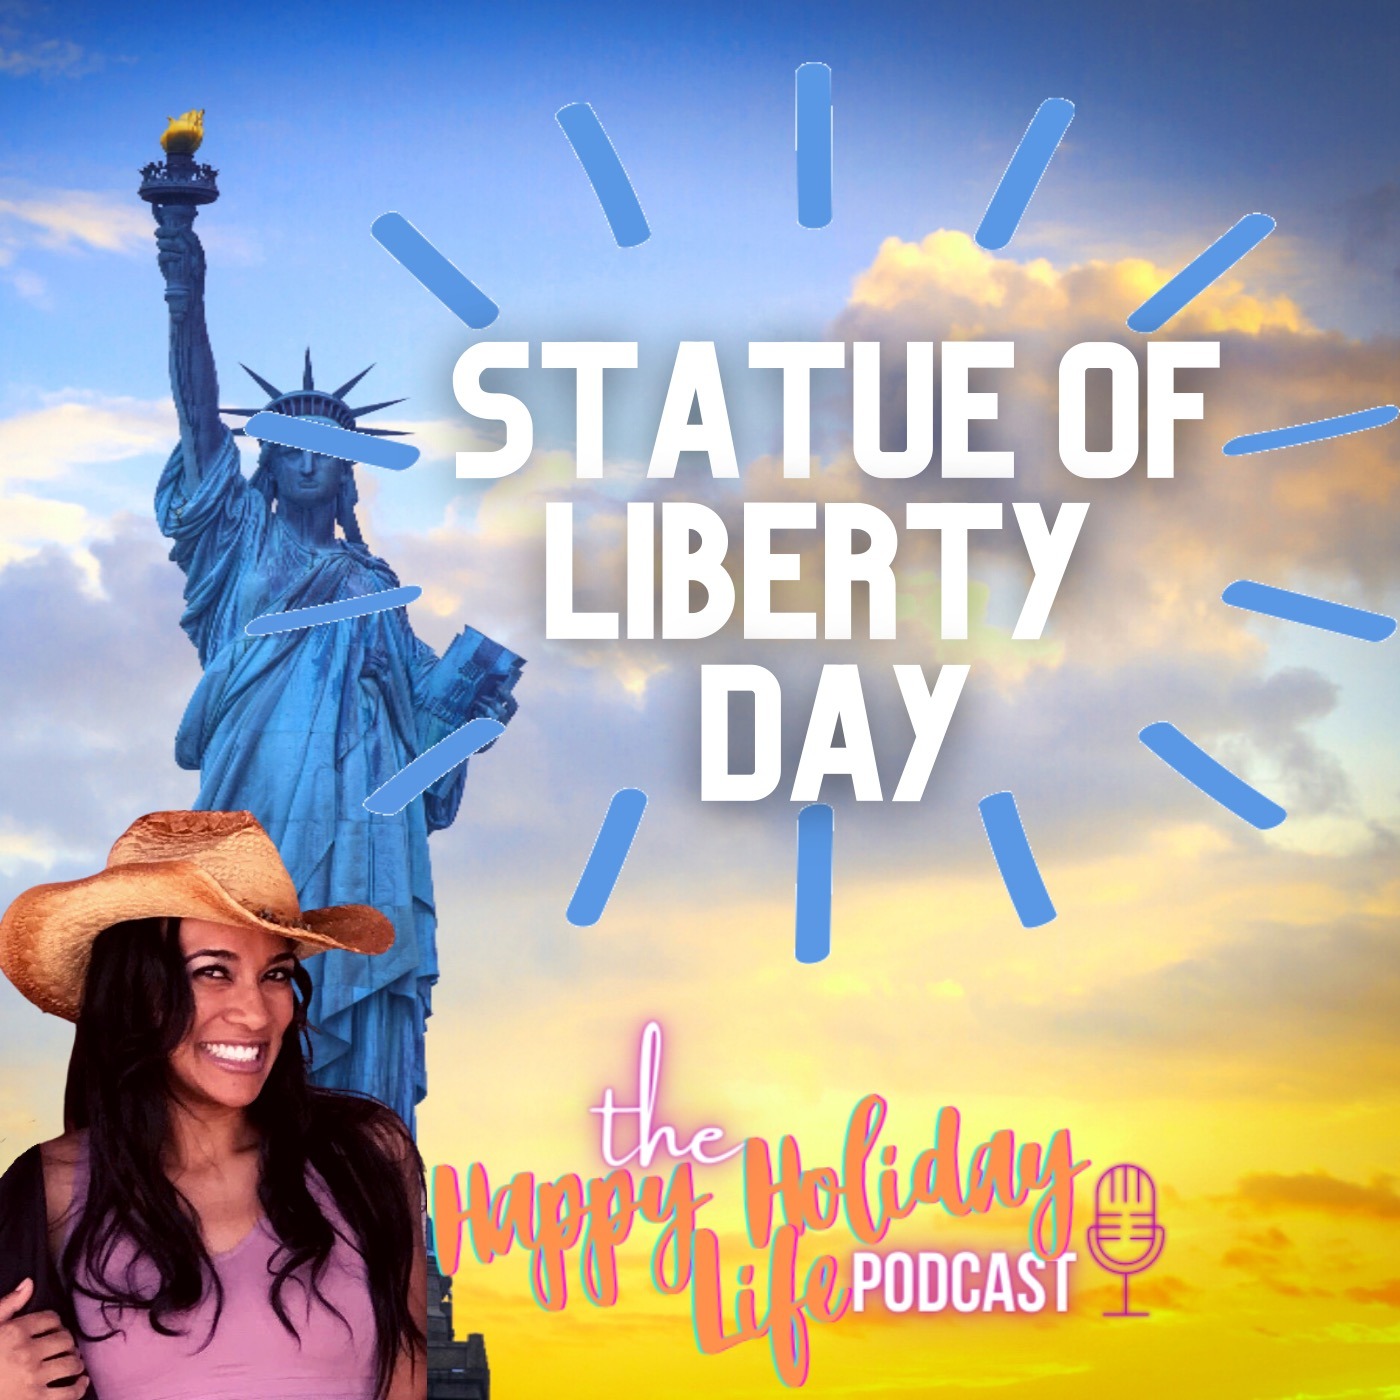 Episode #011 Statue of Liberty Dedication Day Image